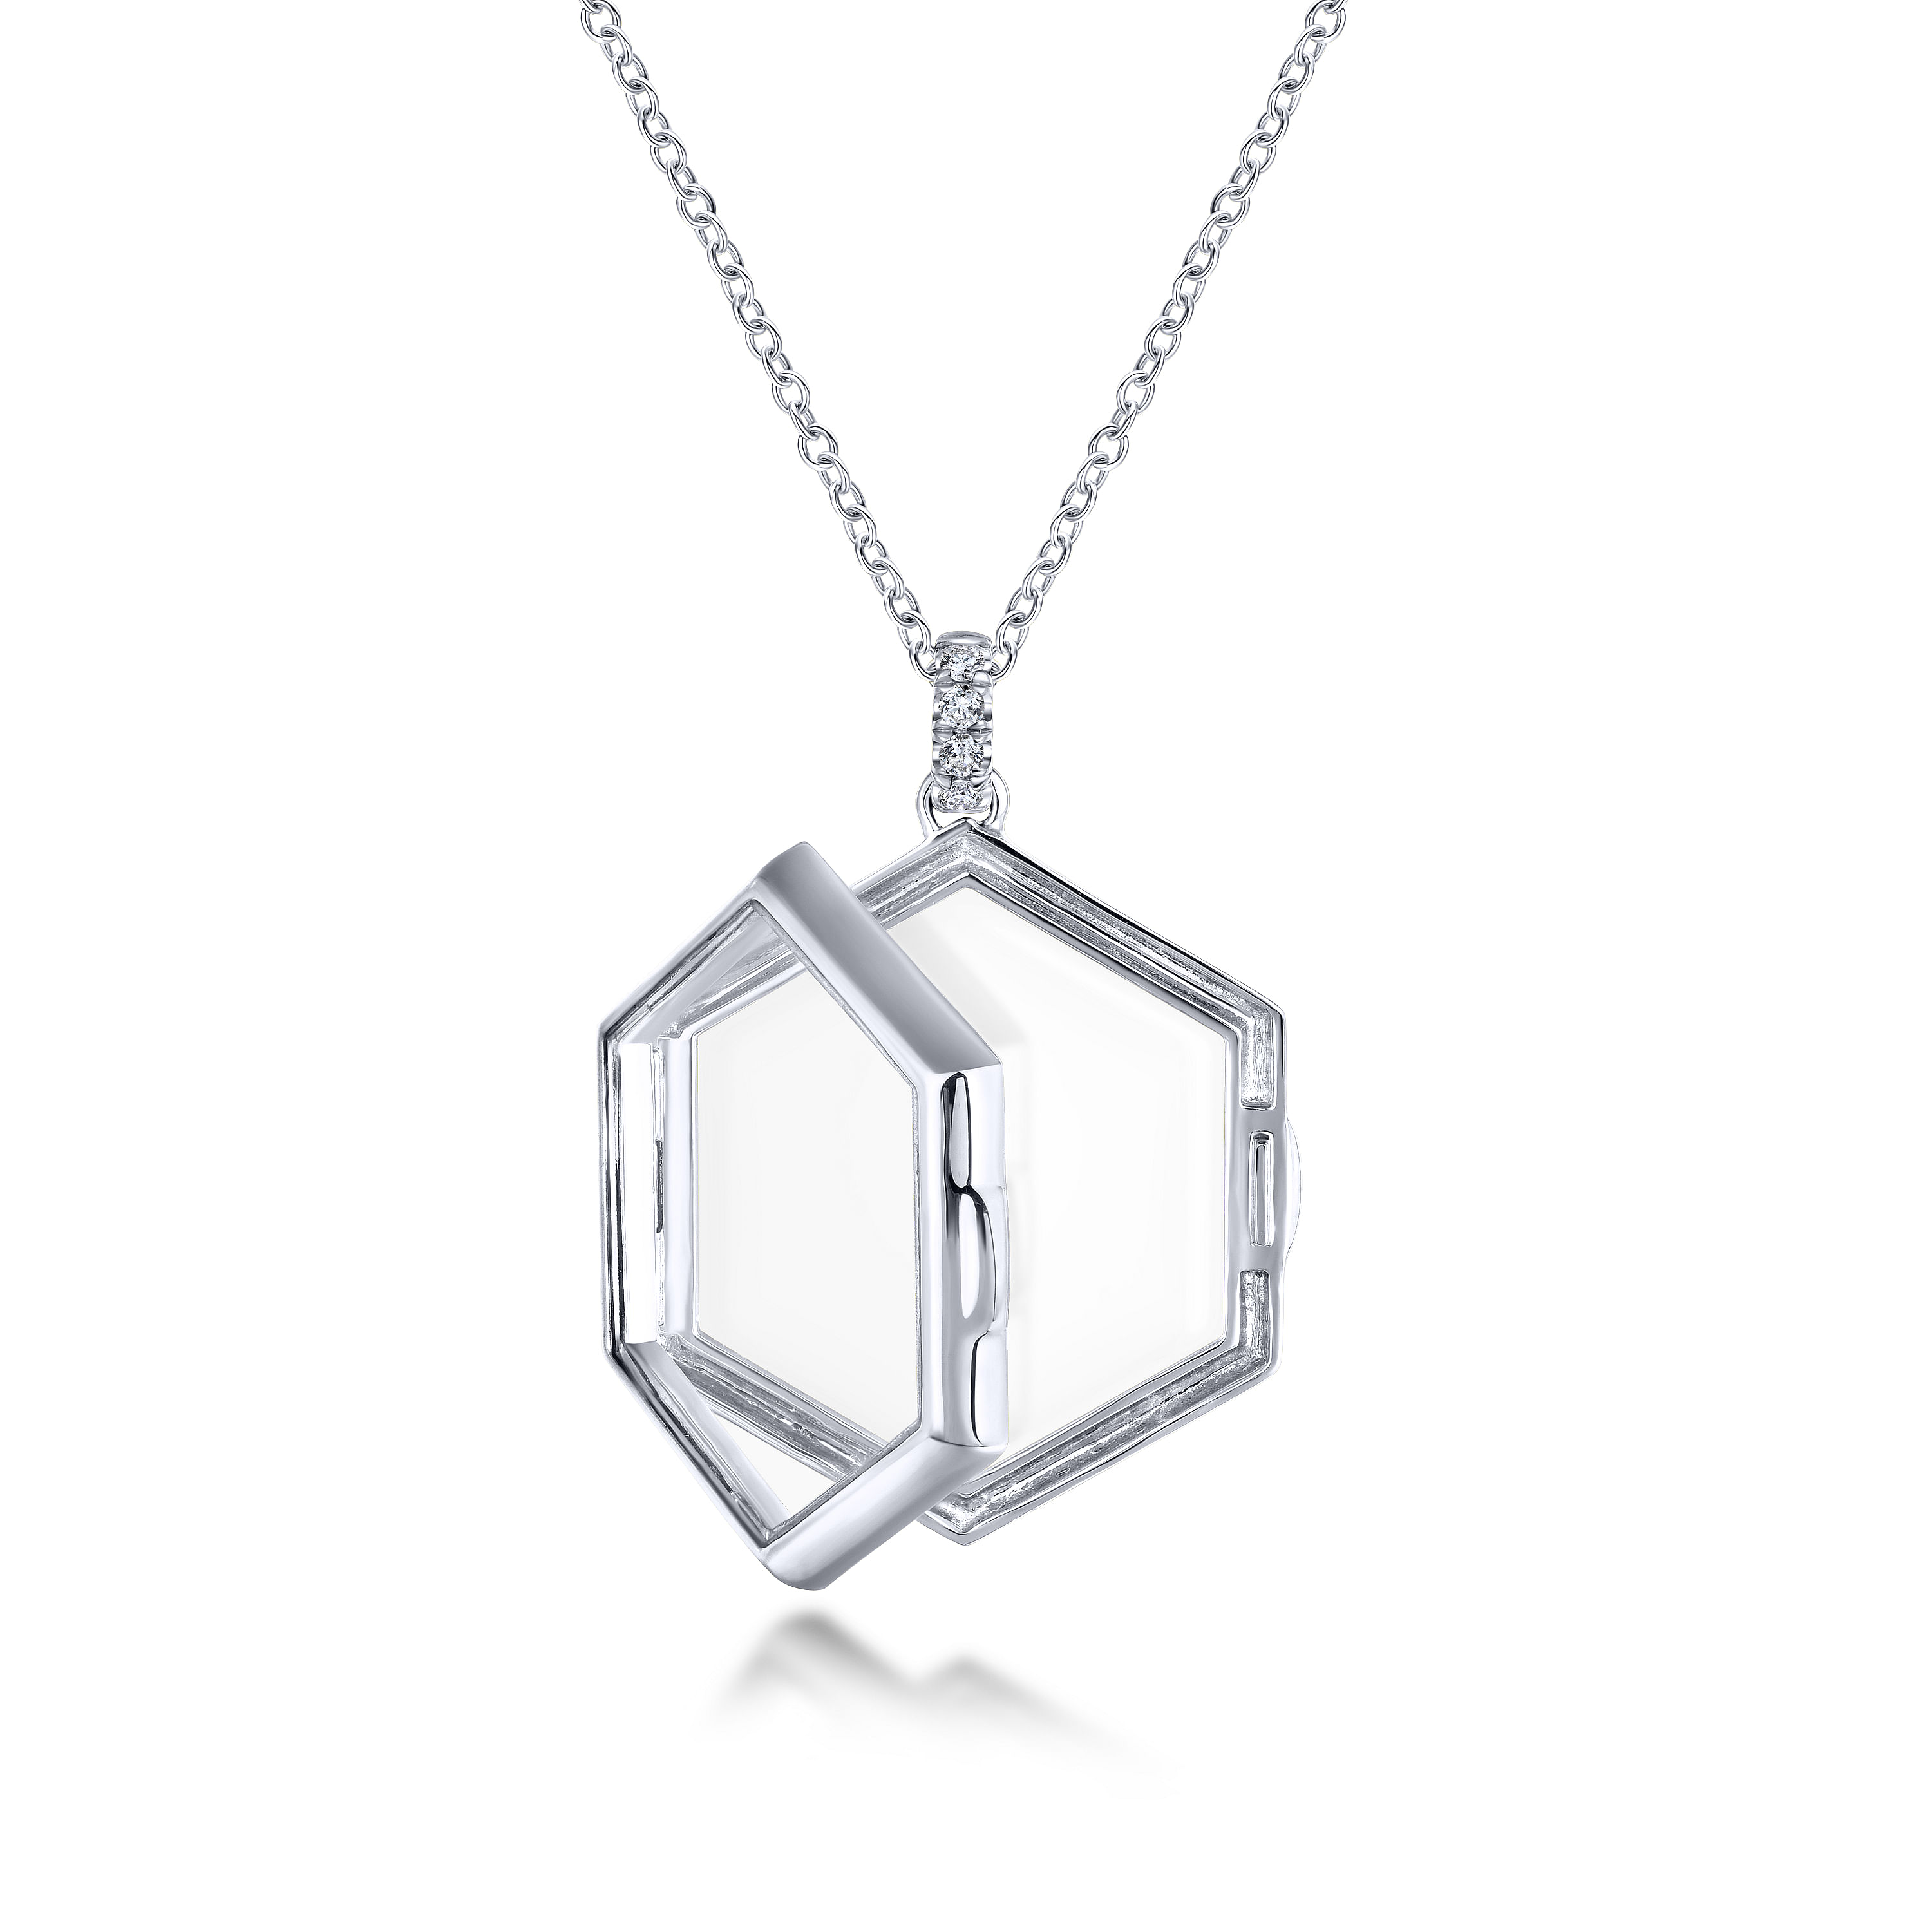 25 inch 14K White Gold Hexagonal Glass Front Locket Necklace